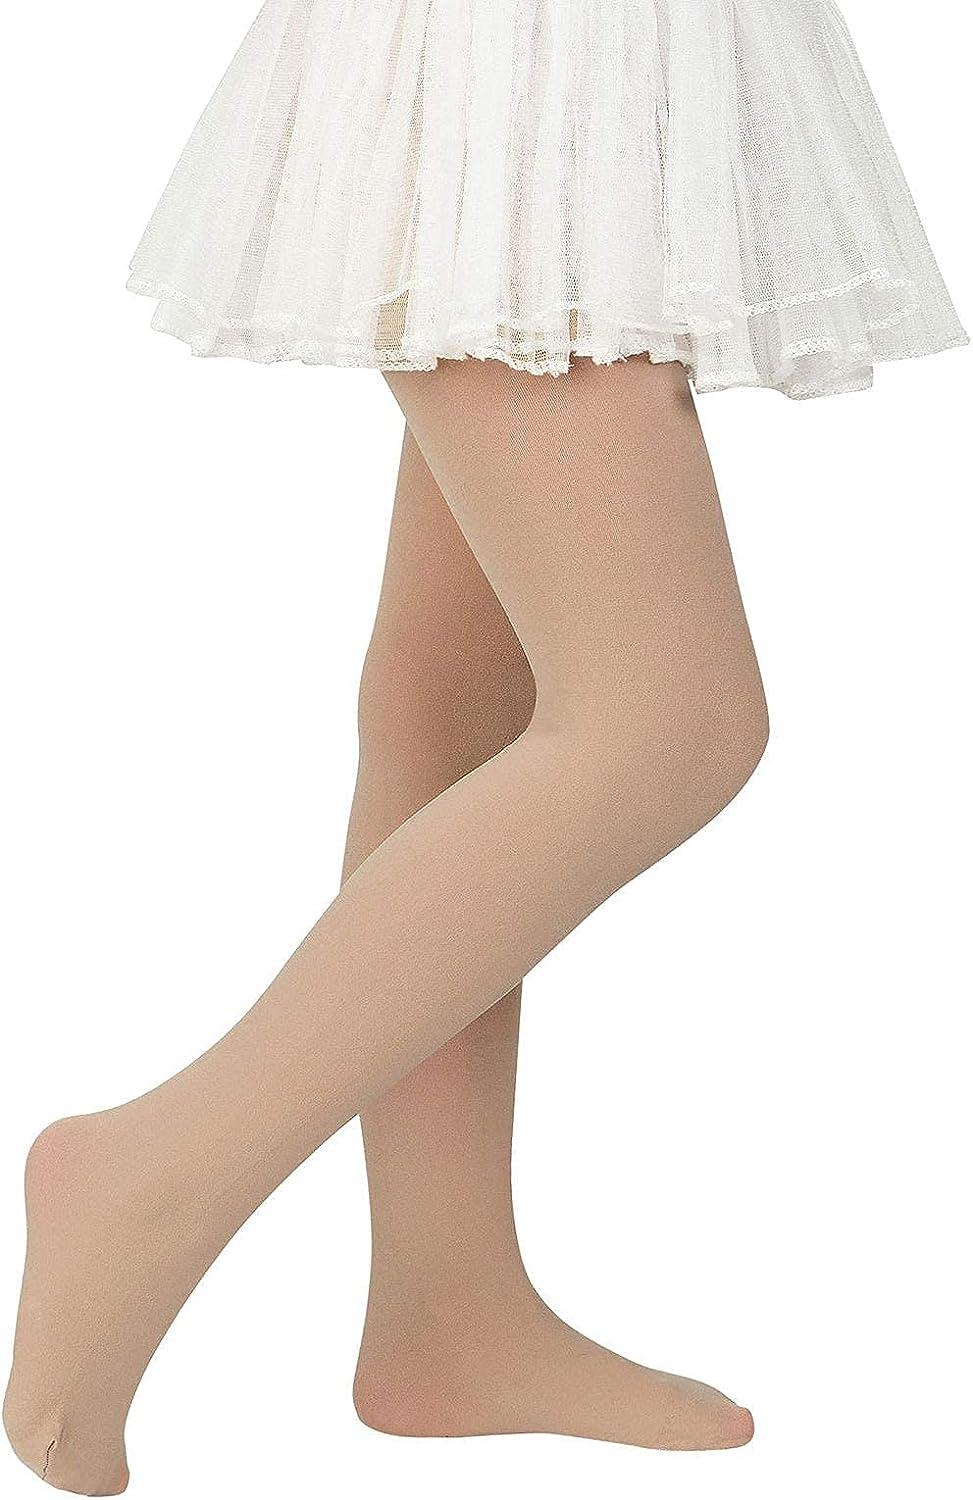 American Trends Tights for Women 80D Run Resistant Soft Opaque Solid Color  Control Top Stockings